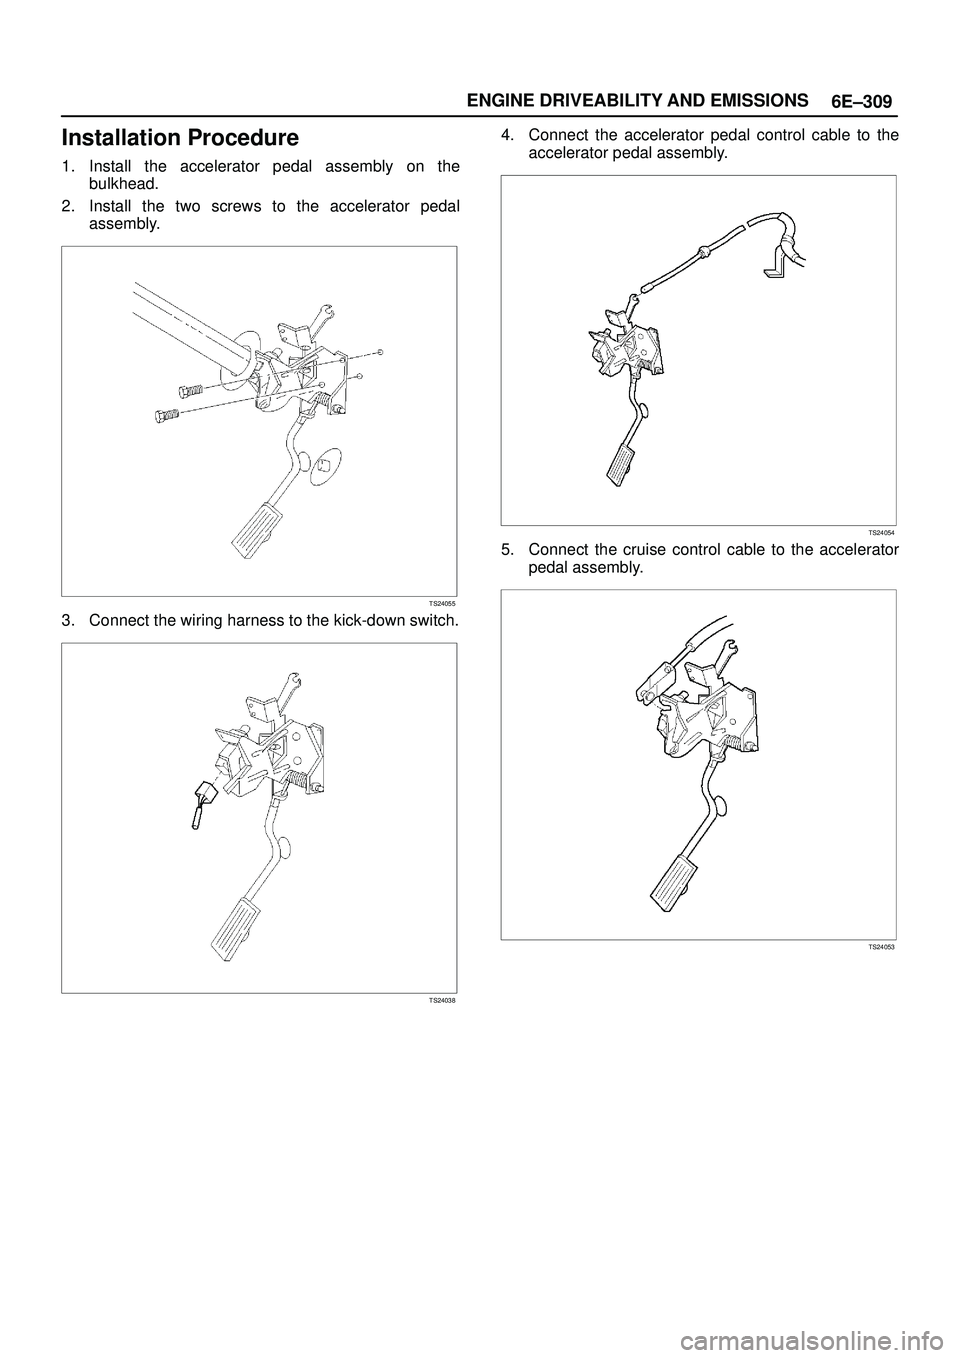 ISUZU TROOPER 1998  Service Repair Manual 6E±309 ENGINE DRIVEABILITY AND EMISSIONS
Installation Procedure
1. Install the accelerator pedal assembly on the
bulkhead.
2. Install the two screws to the accelerator pedal
assembly.
TS24055
3. Conn